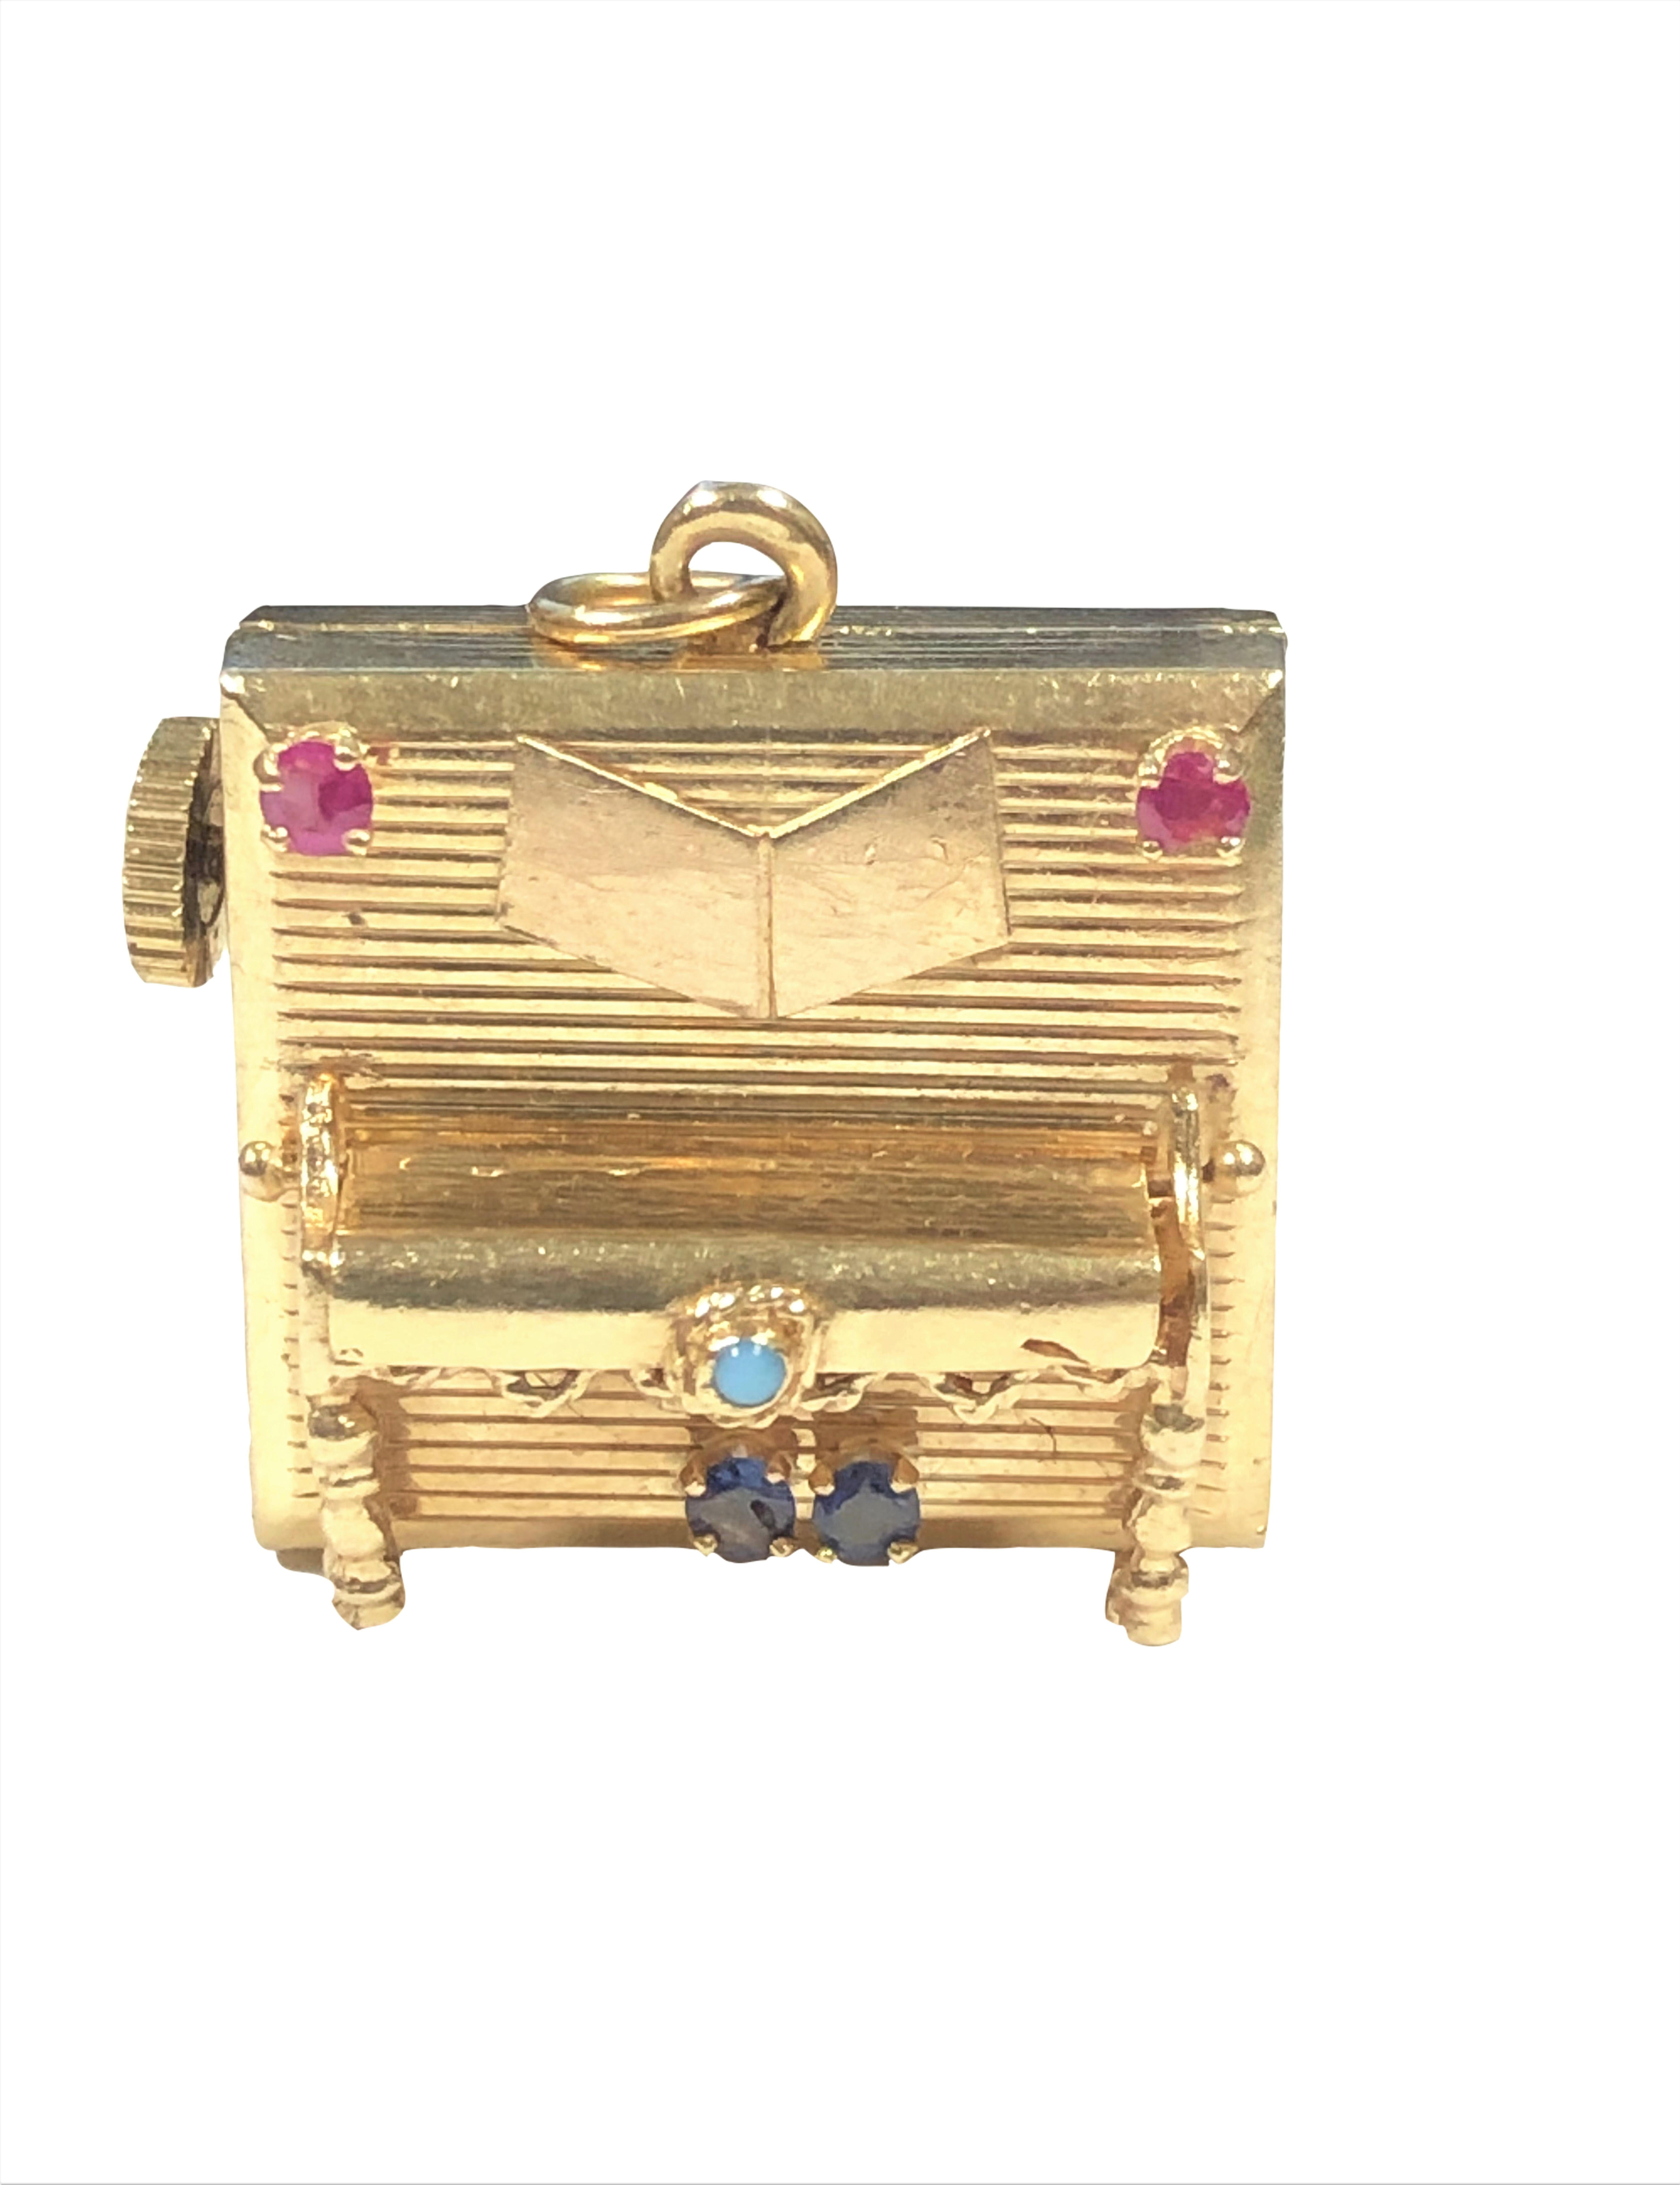 Circa 1960s 14K Yellow Gold Piano Charm, possibly by Dankner but no makers mark, measuring 1 1/8 inch in length, 1/2 inch wide and 7/8 inch in height, weighing 20.9 Grams and set with Rubies, Sapphires and Turquoise, nicely detailed and the lid over